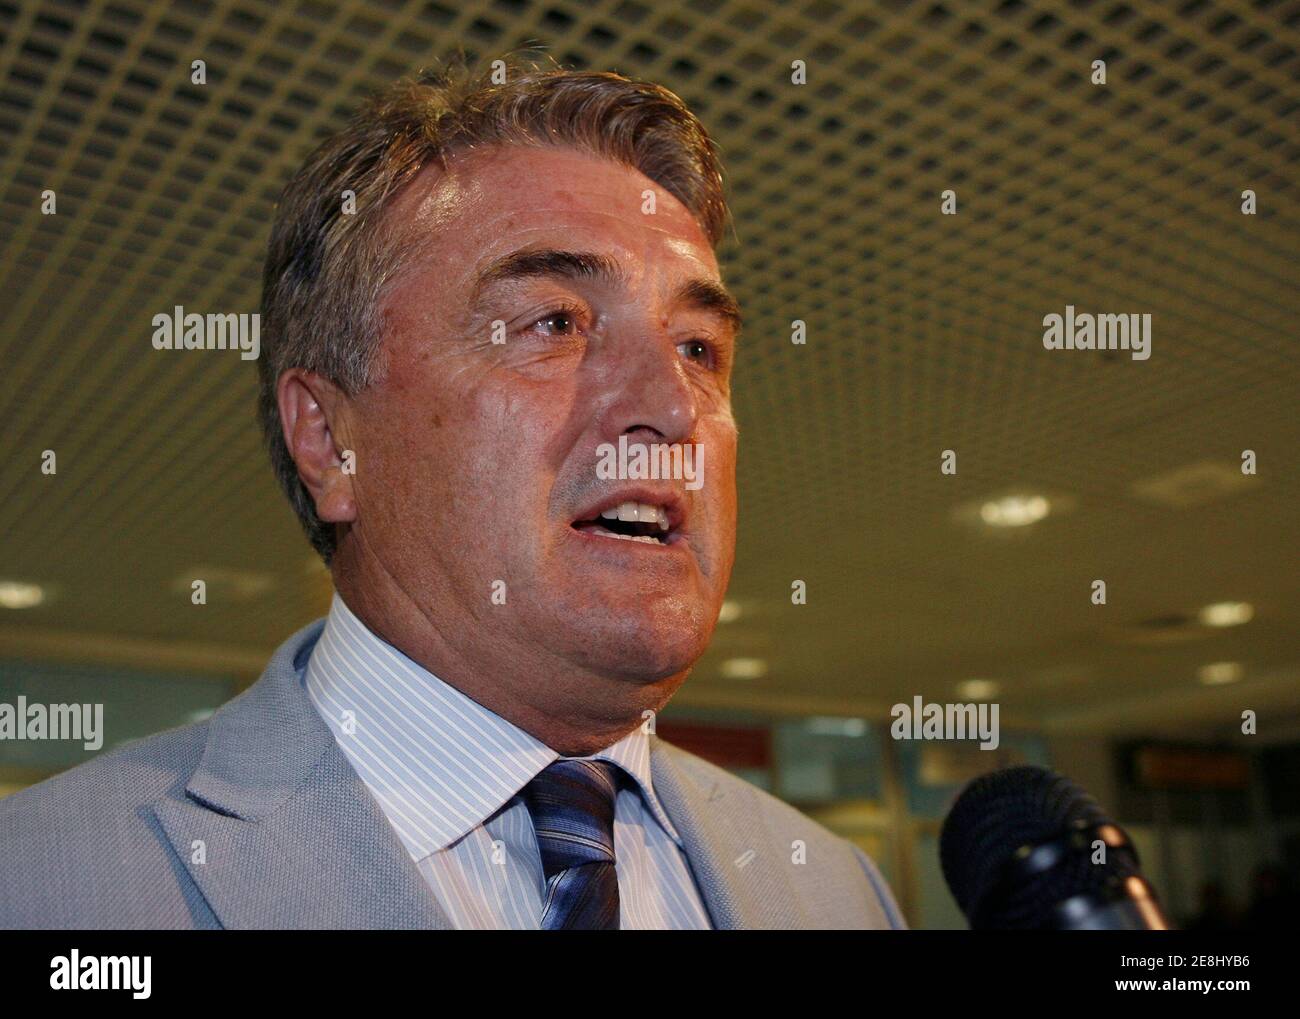 Serbia's new soccer coach Radomir Antic answers questions upon his arrival at Belgrade's airport August 24, 2008. REUTERS/Ivan Milutinovic  (SERBIA) Stock Photo